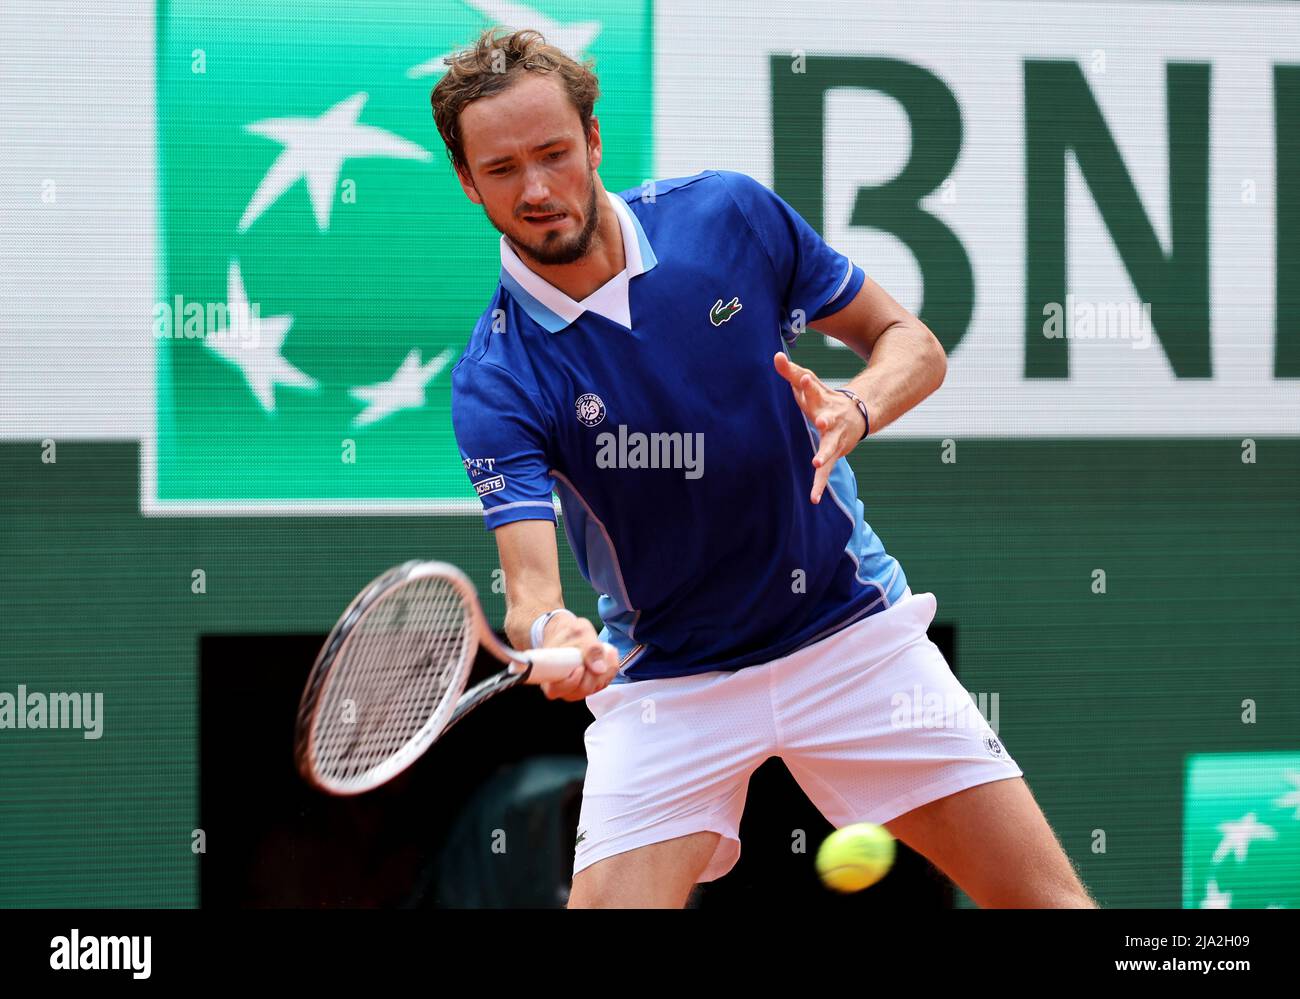 Paris, France - 26/05/2022, Daniil Medvedev of Russia during day 5 of the  French Open 2022, Roland-Garros 2022, second Grand Slam tennis tournament  of the season on May 26, 2022 at Roland-Garros